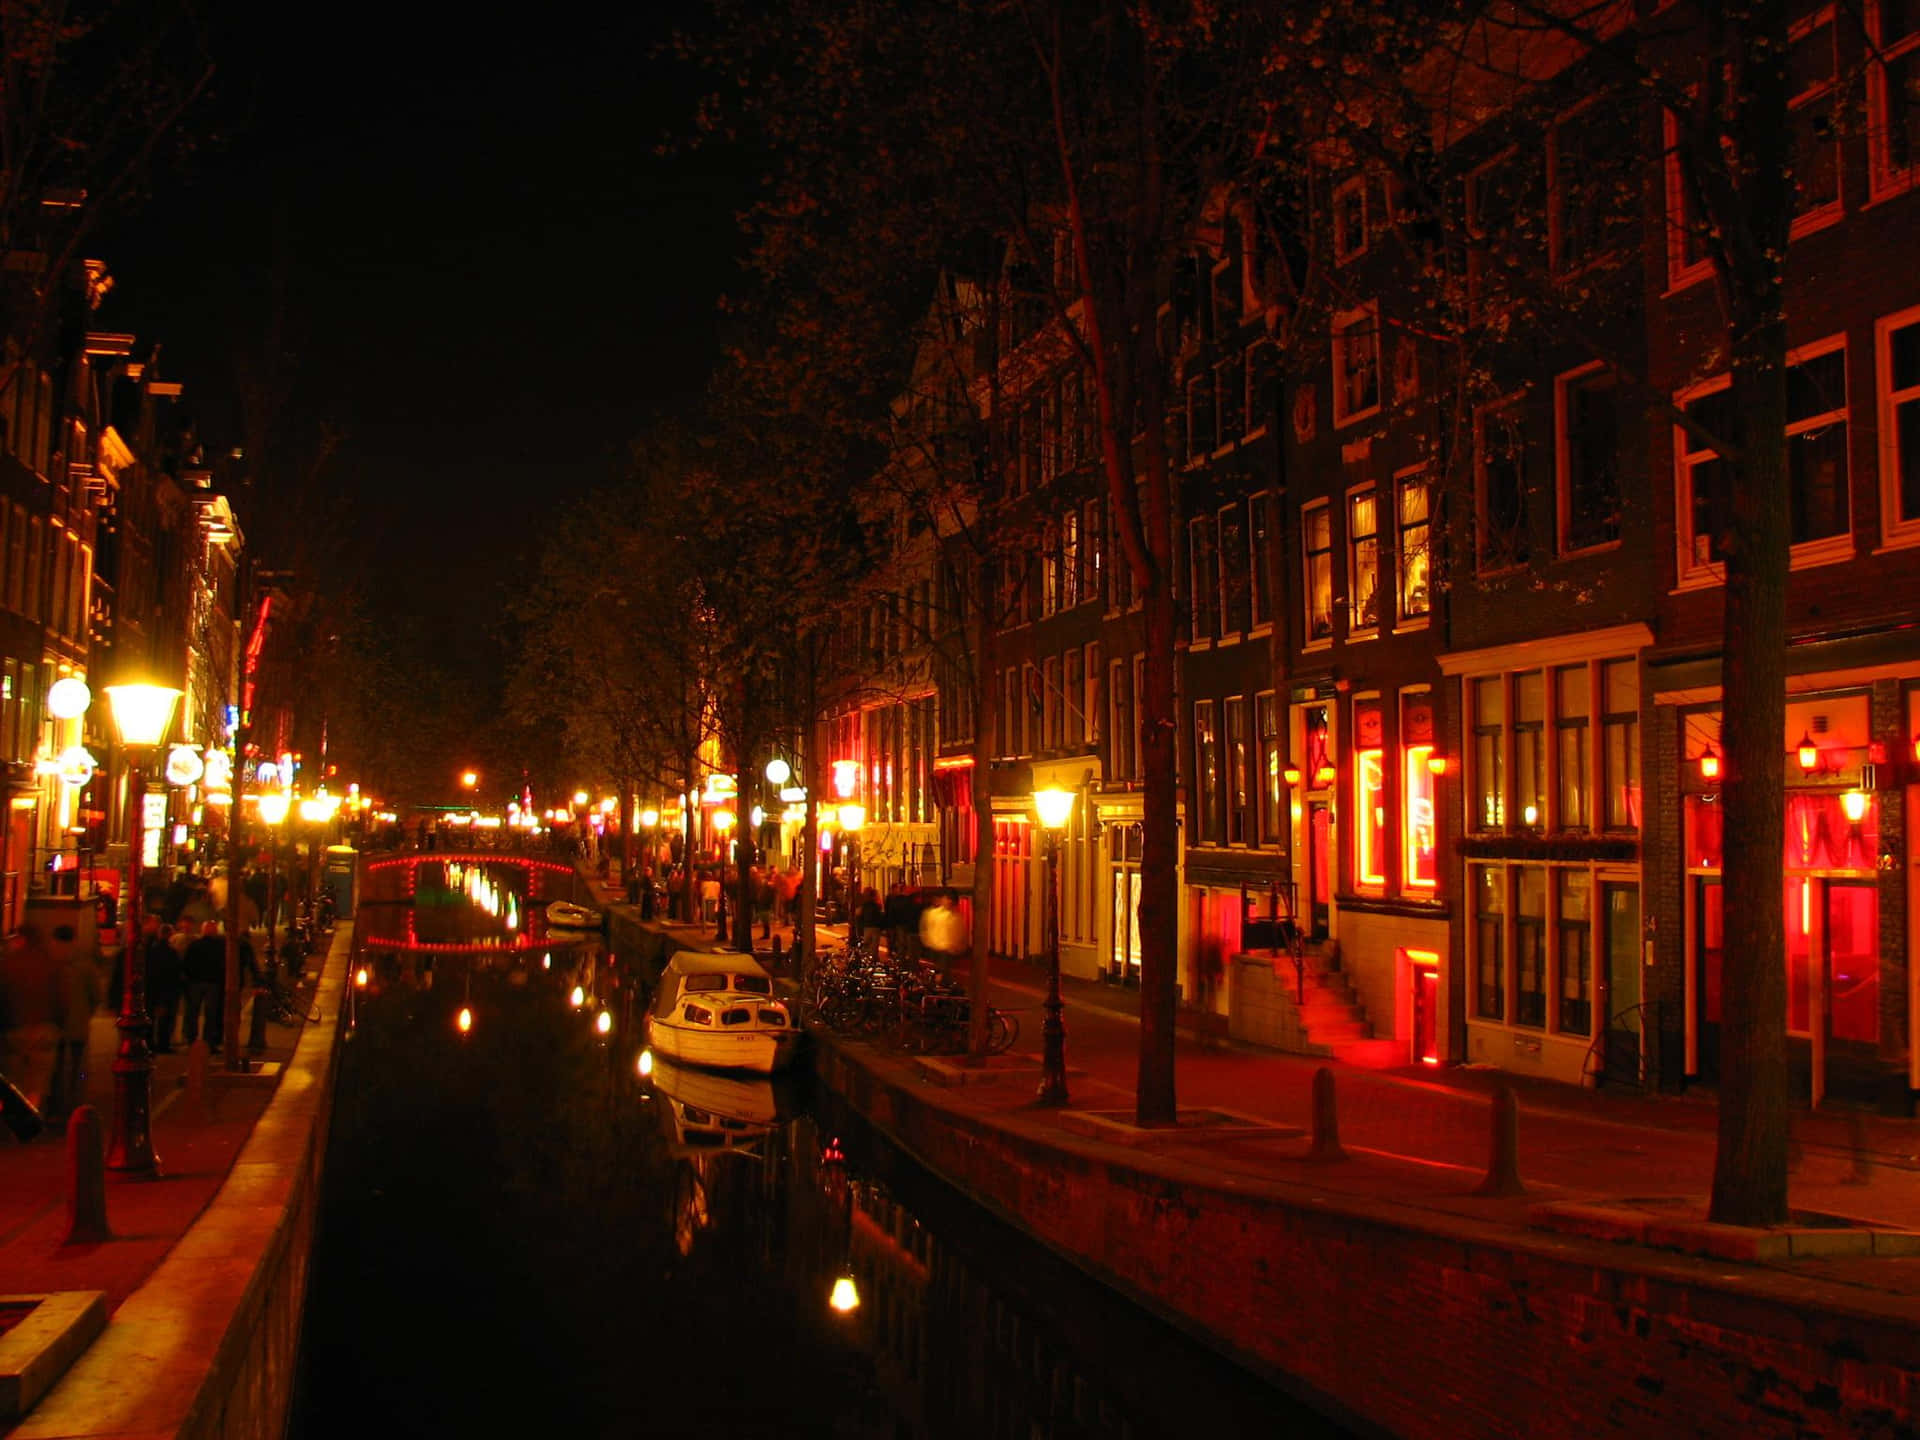 Illuminated Nightlife in the Red Light District Wallpaper